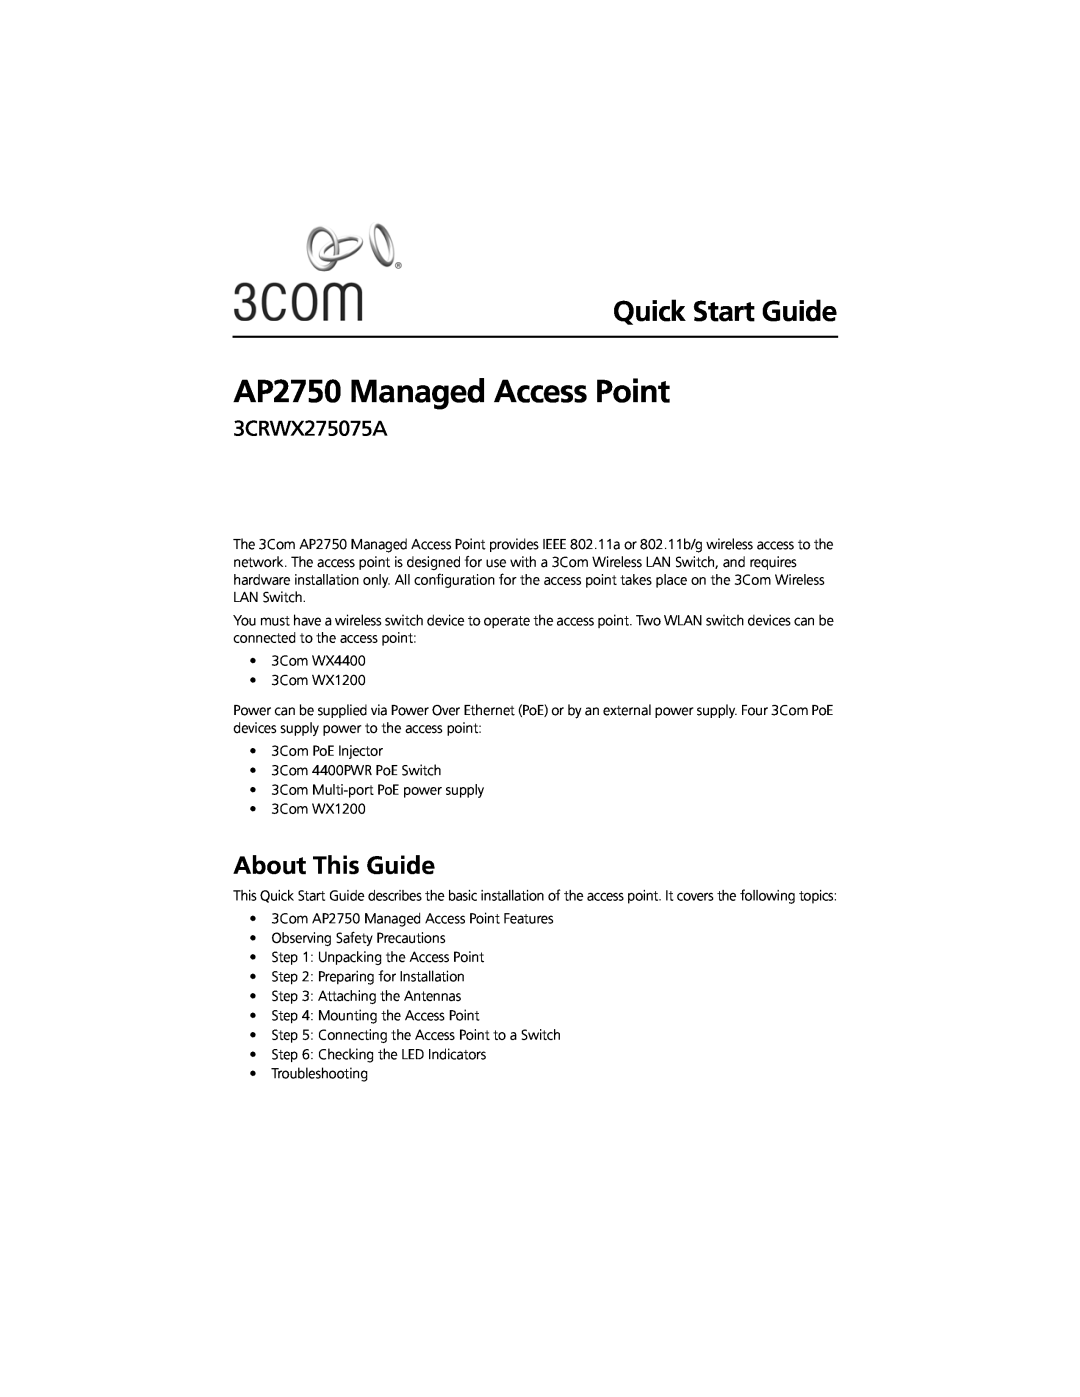 3Com quick start About This Guide, AP2750 Managed Access Point, Quick Start Guide, 3CRWX275075A 